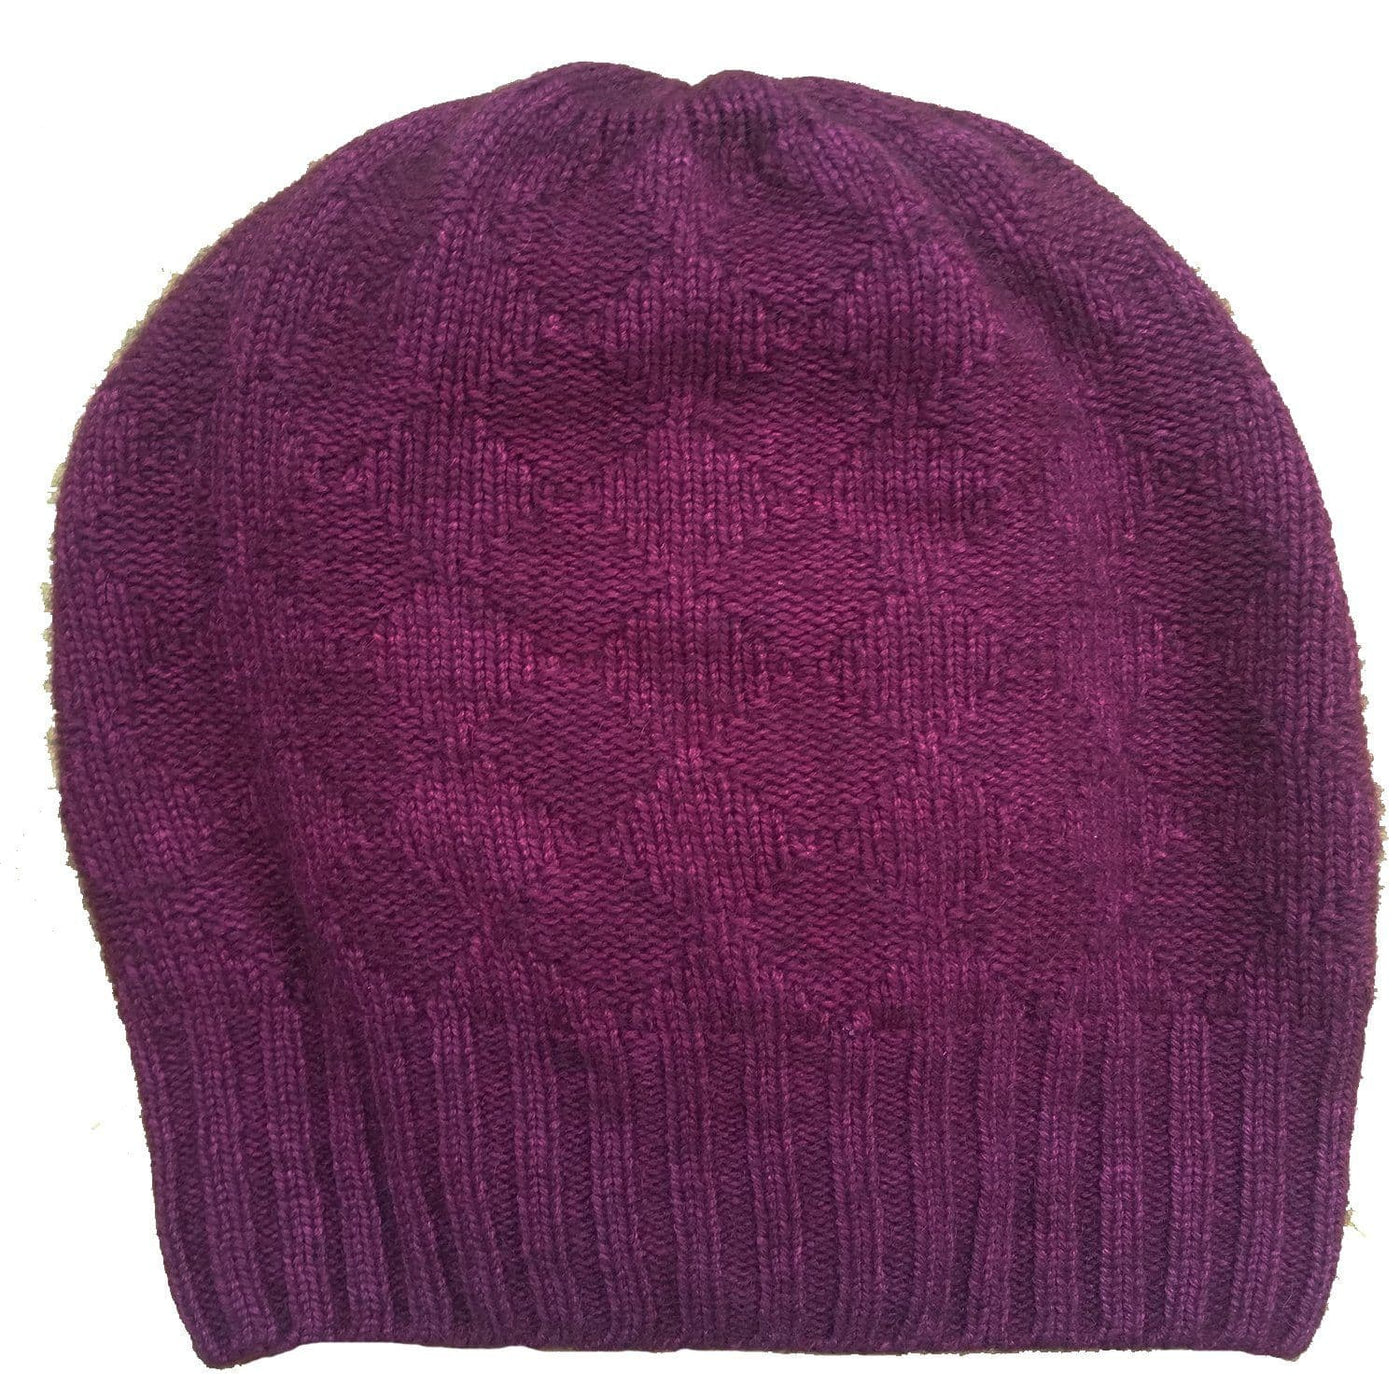 Slouchy Bison/Silk Knitted Hat Bison Gear The Buffalo Wool Co. Burgundy 